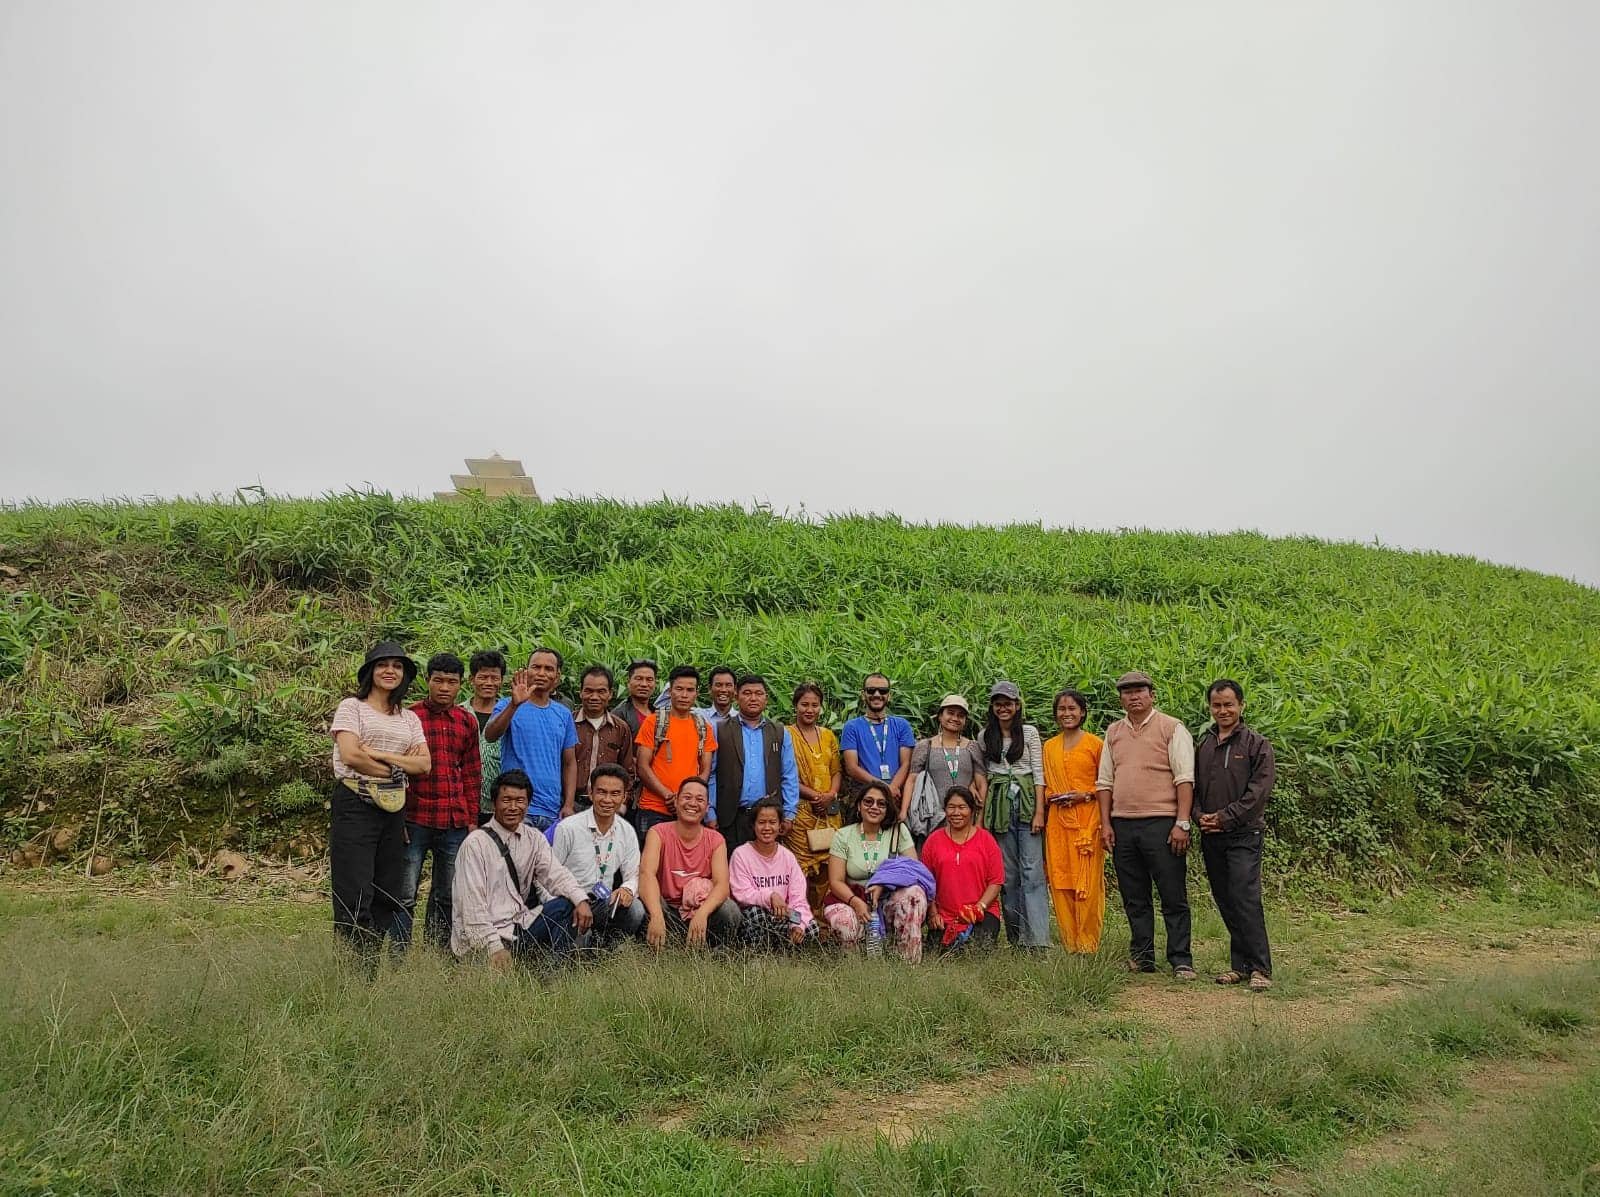 Bighnaharta Nepal's Agriculture Skills Exchange and Tour Program